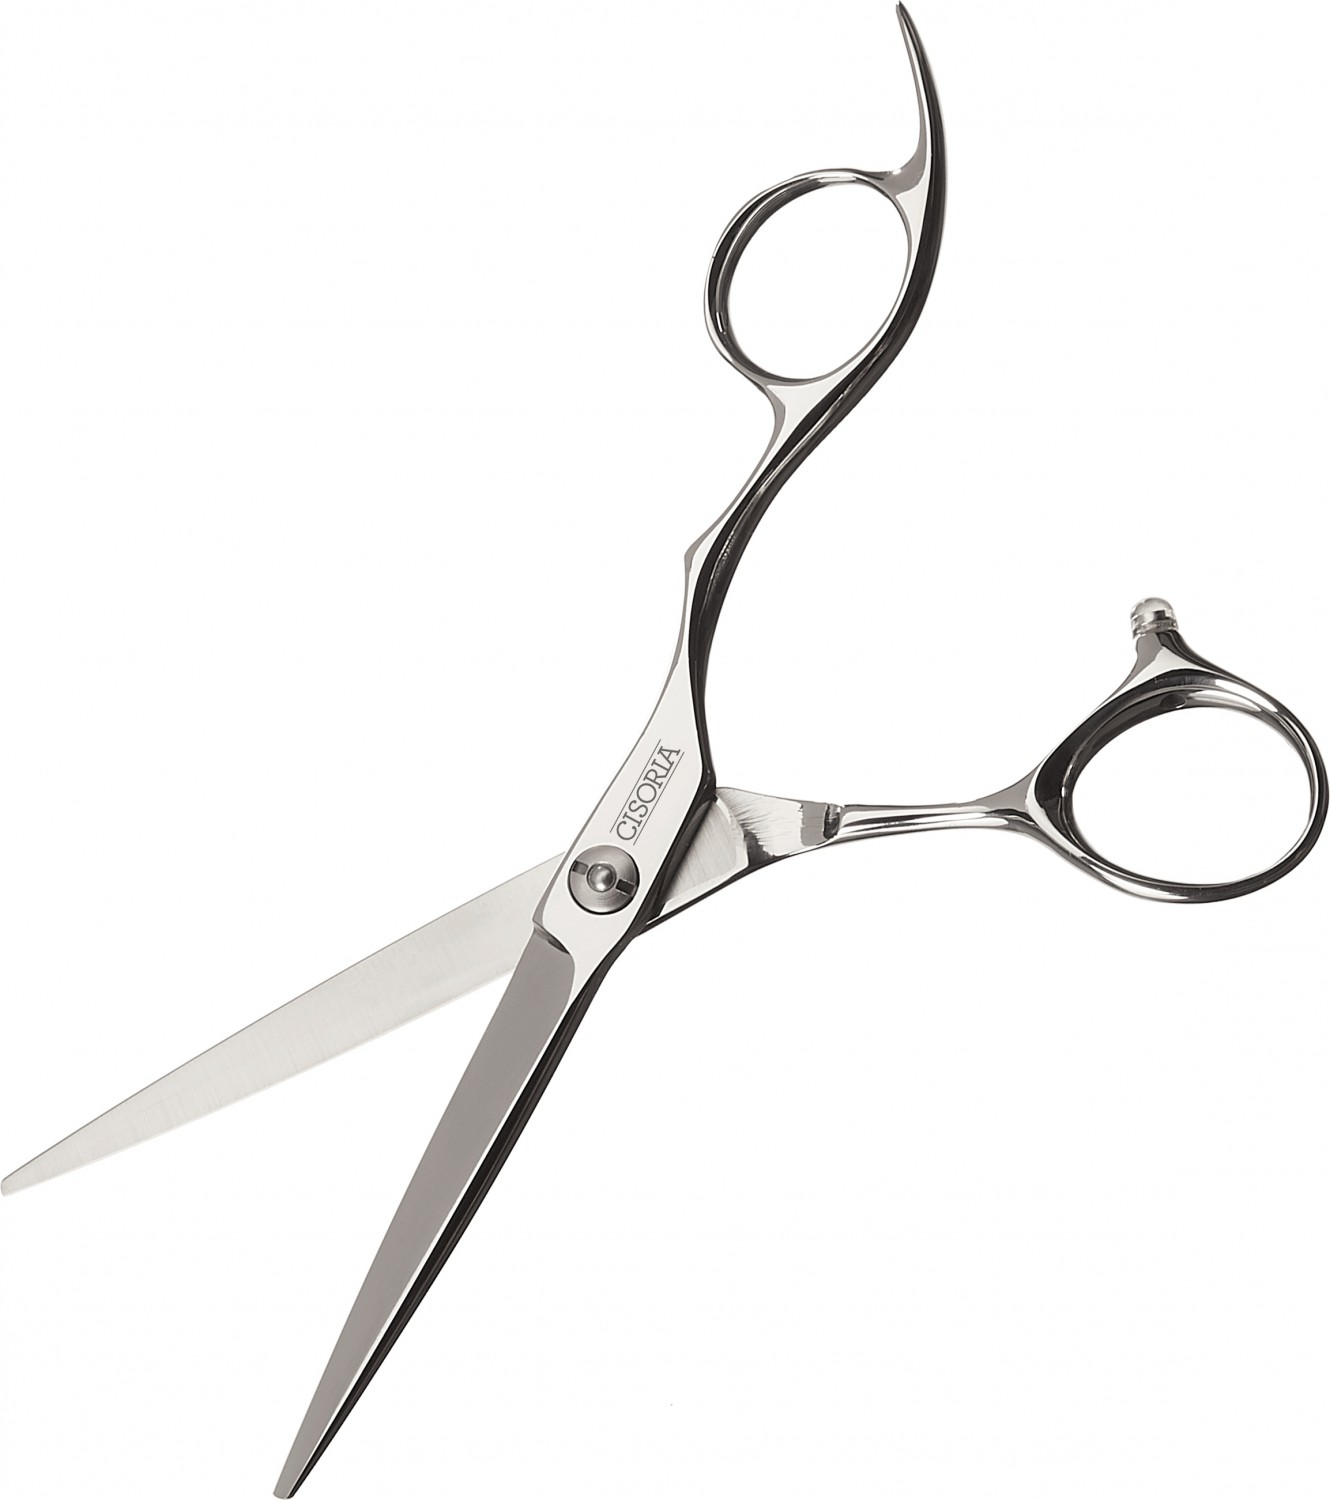  Cisoria Offset Cutting Scissors 6,5" Series O by Sibel 